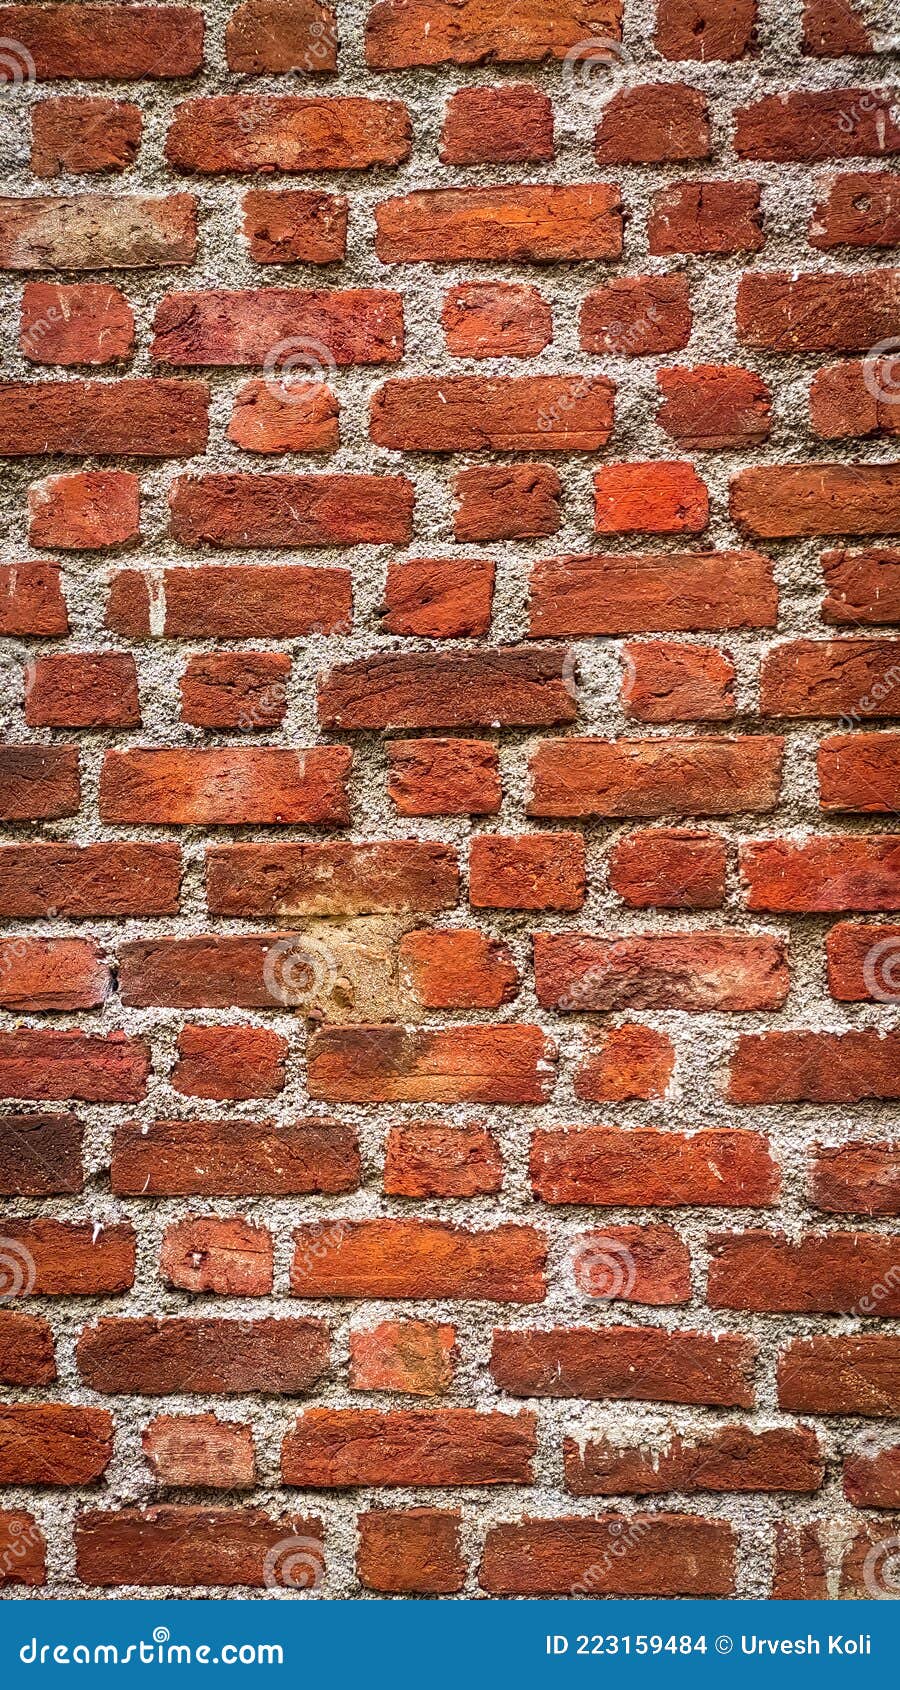 brick red wall mobile wallpaper, conceit wall